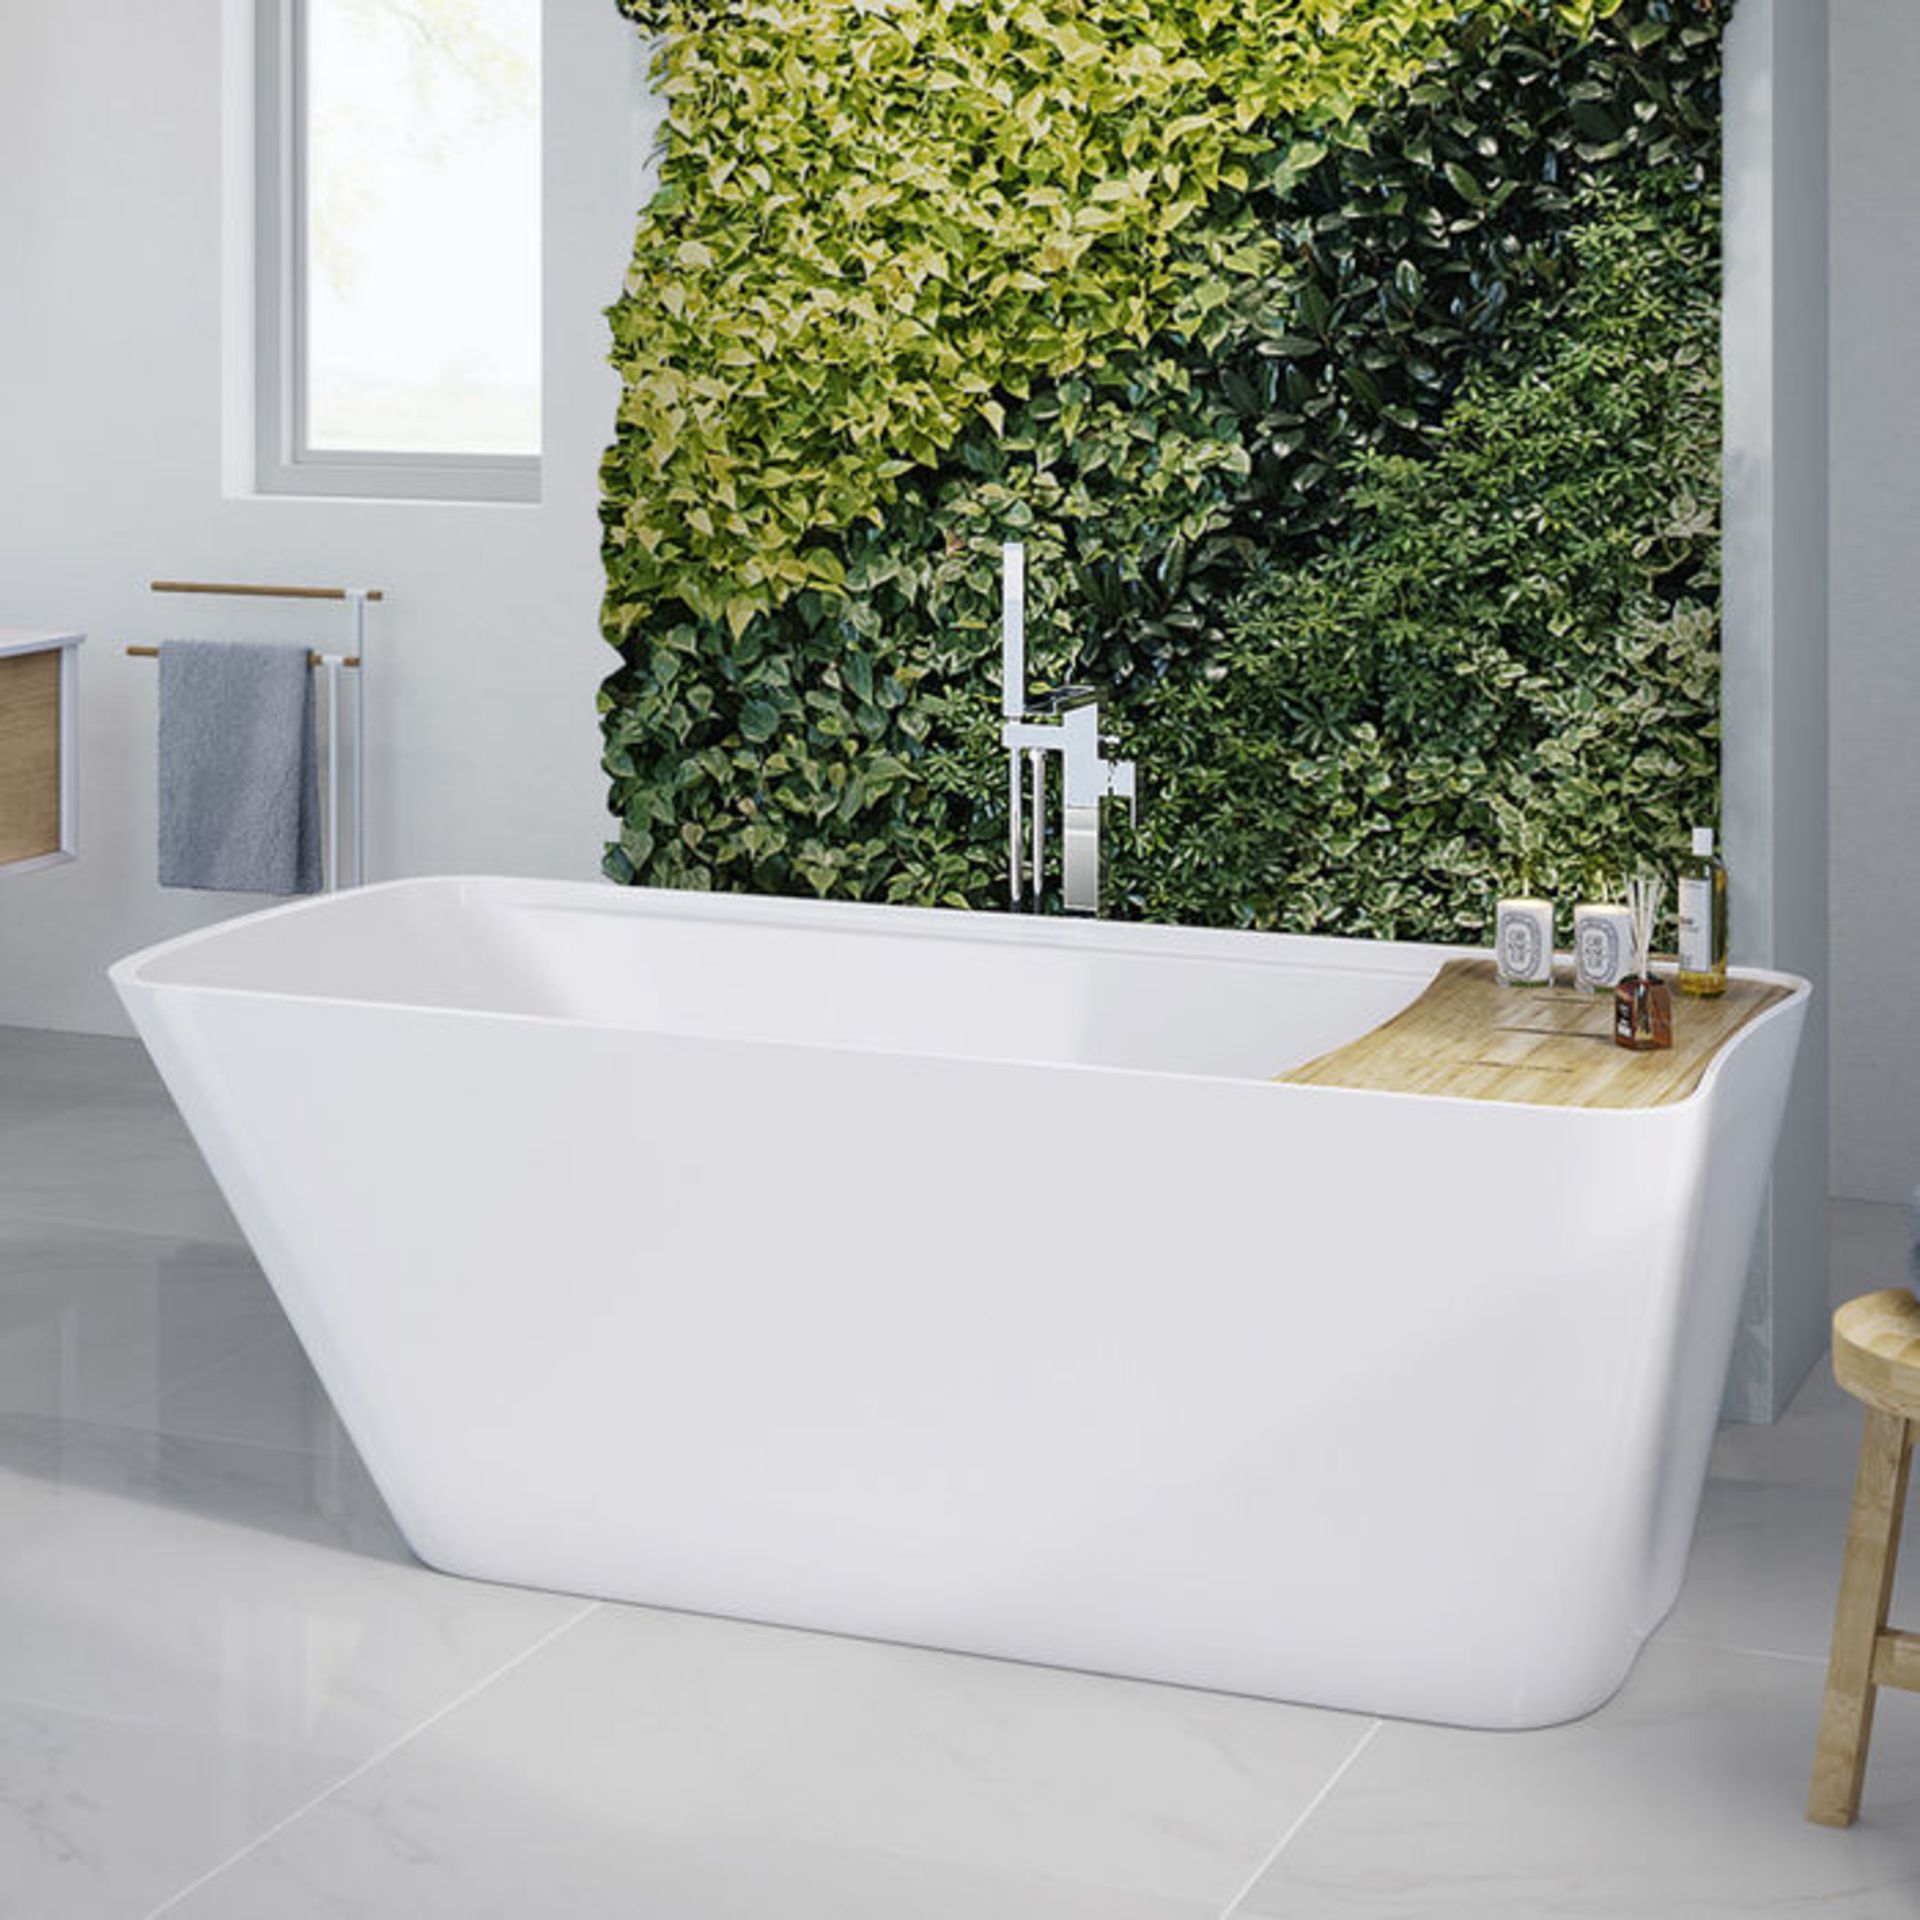 (OS56) 1700mmx780mm Freestanding Berg Bath with Bath Board. RRP £ 1,499. Showcasing style and